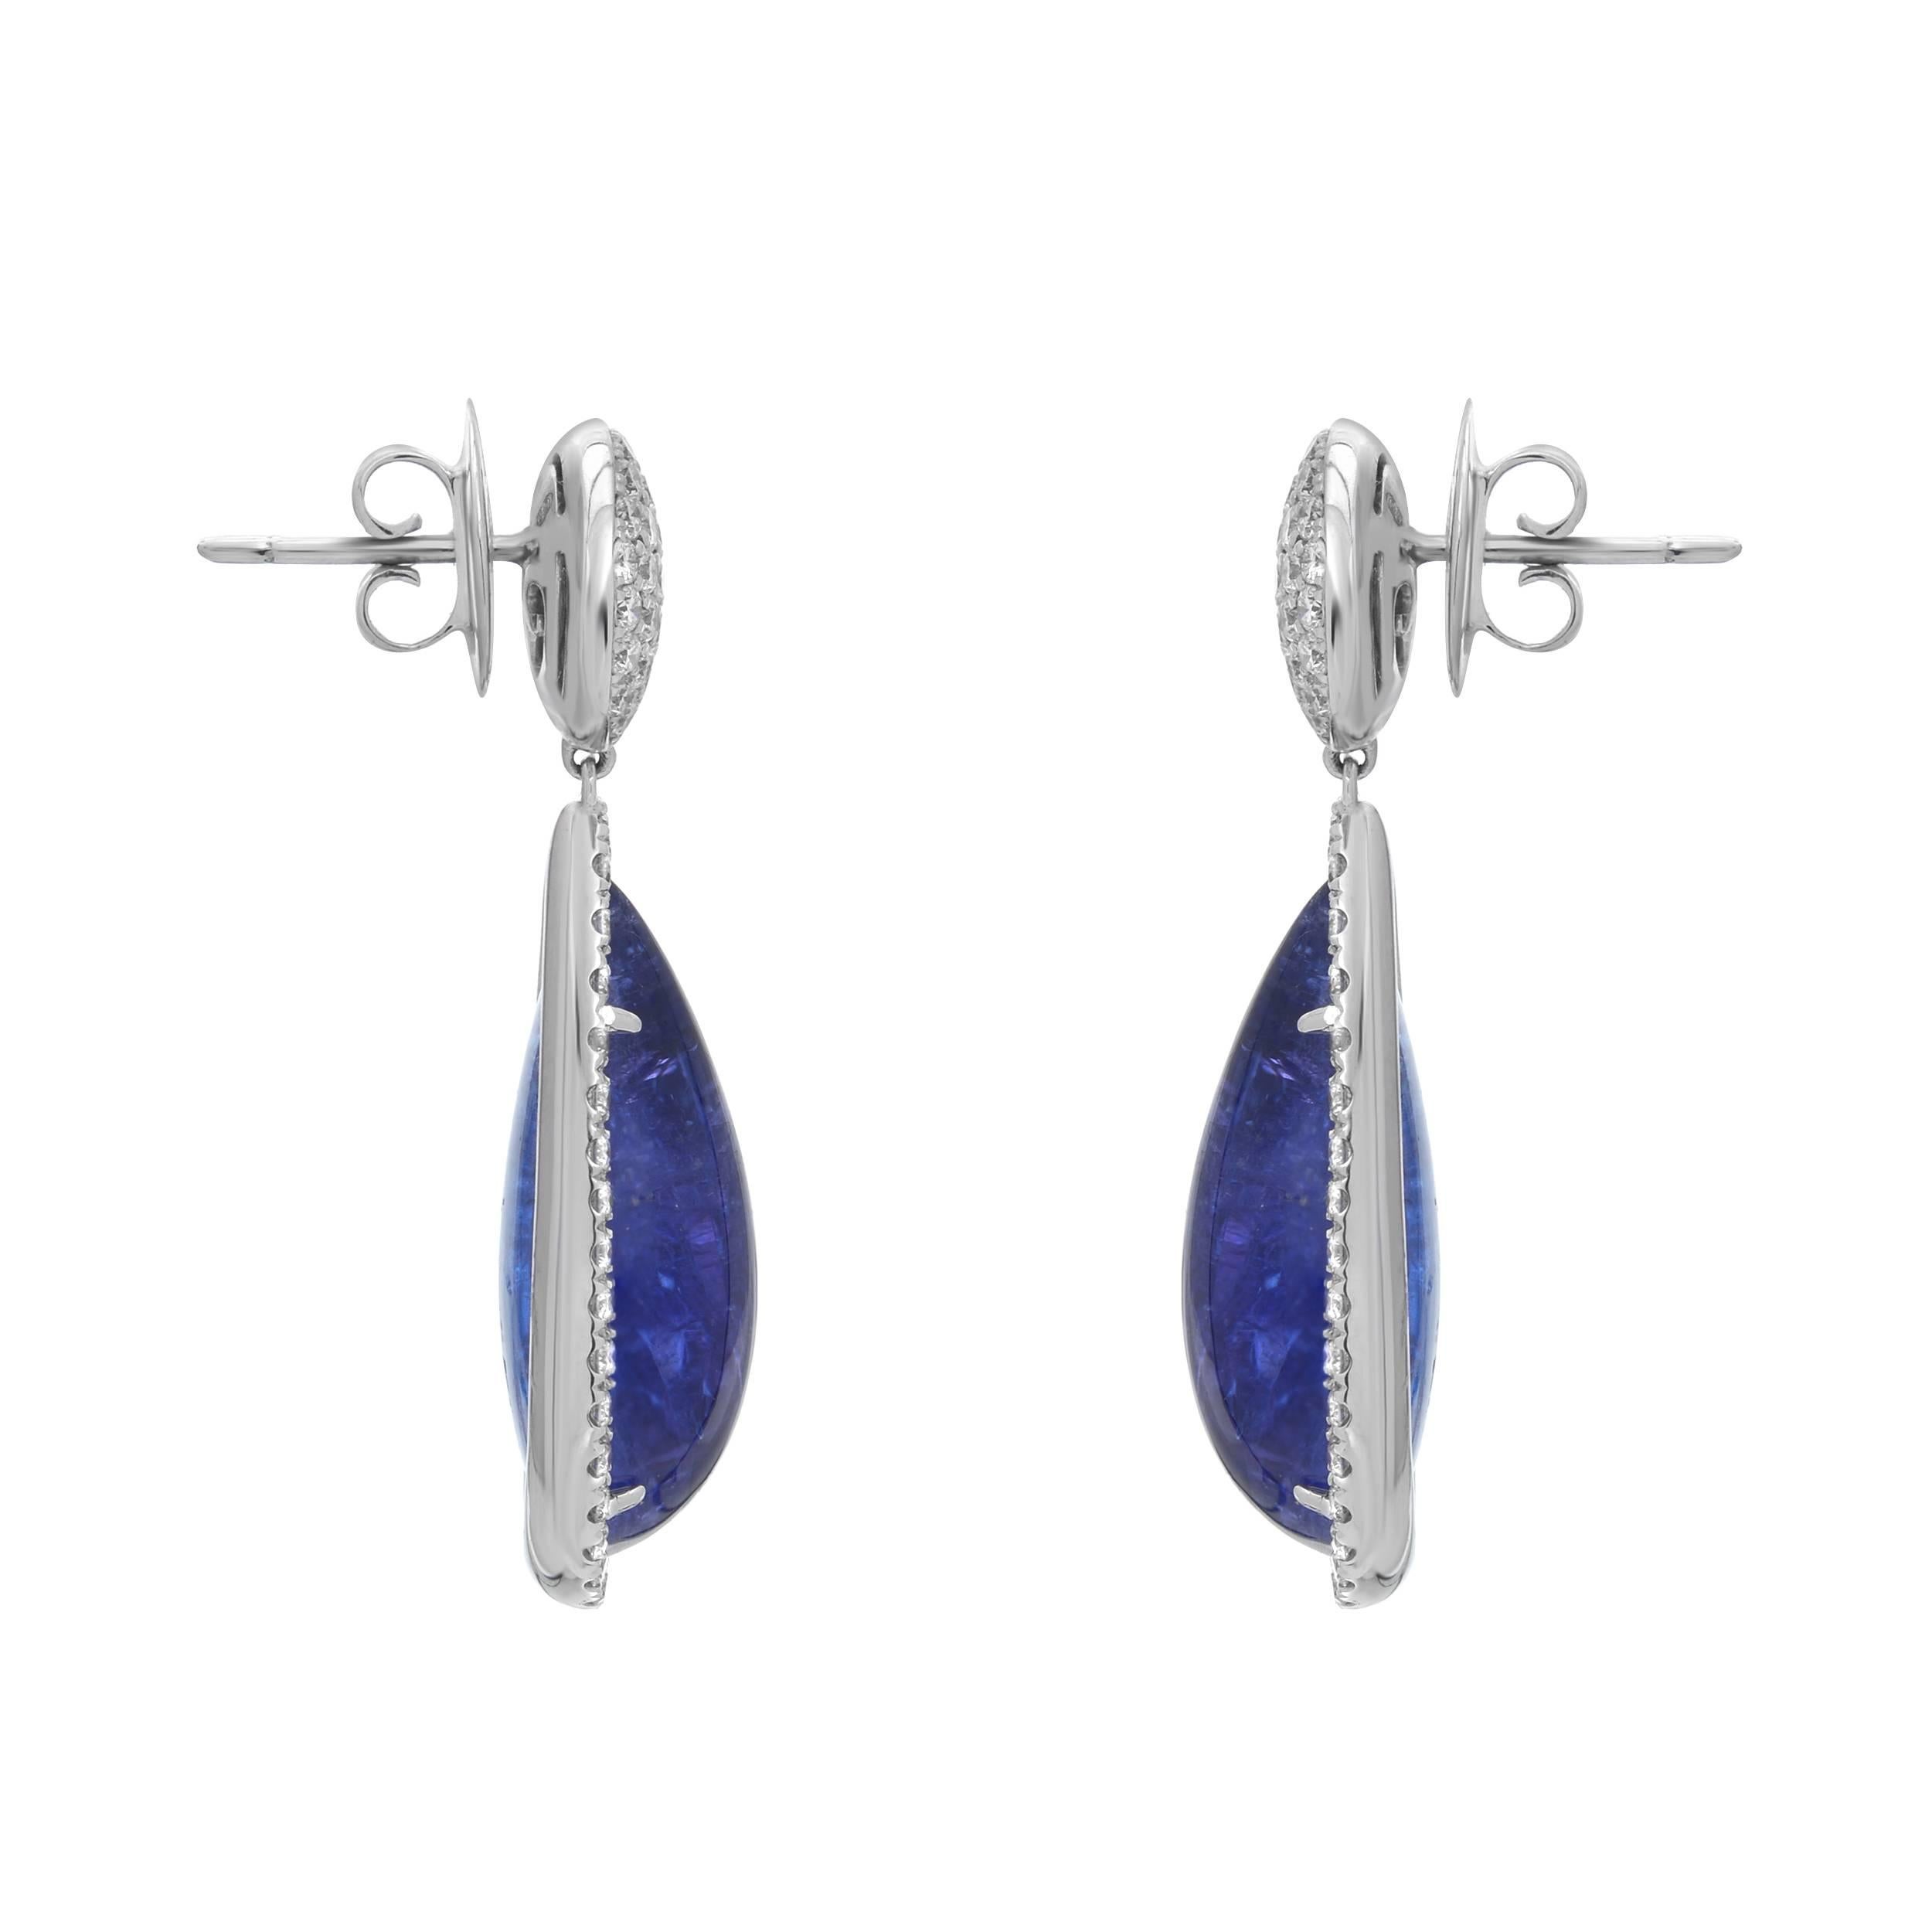 A pair of sophisticated drop earrings. The 47.42 carats of cabochon tanzanites are filled with life and gleam. There are 3.16 carats of white VS quality diamonds clustered at the top of the earring as well as haloing the cabochon tanzanite. Set in